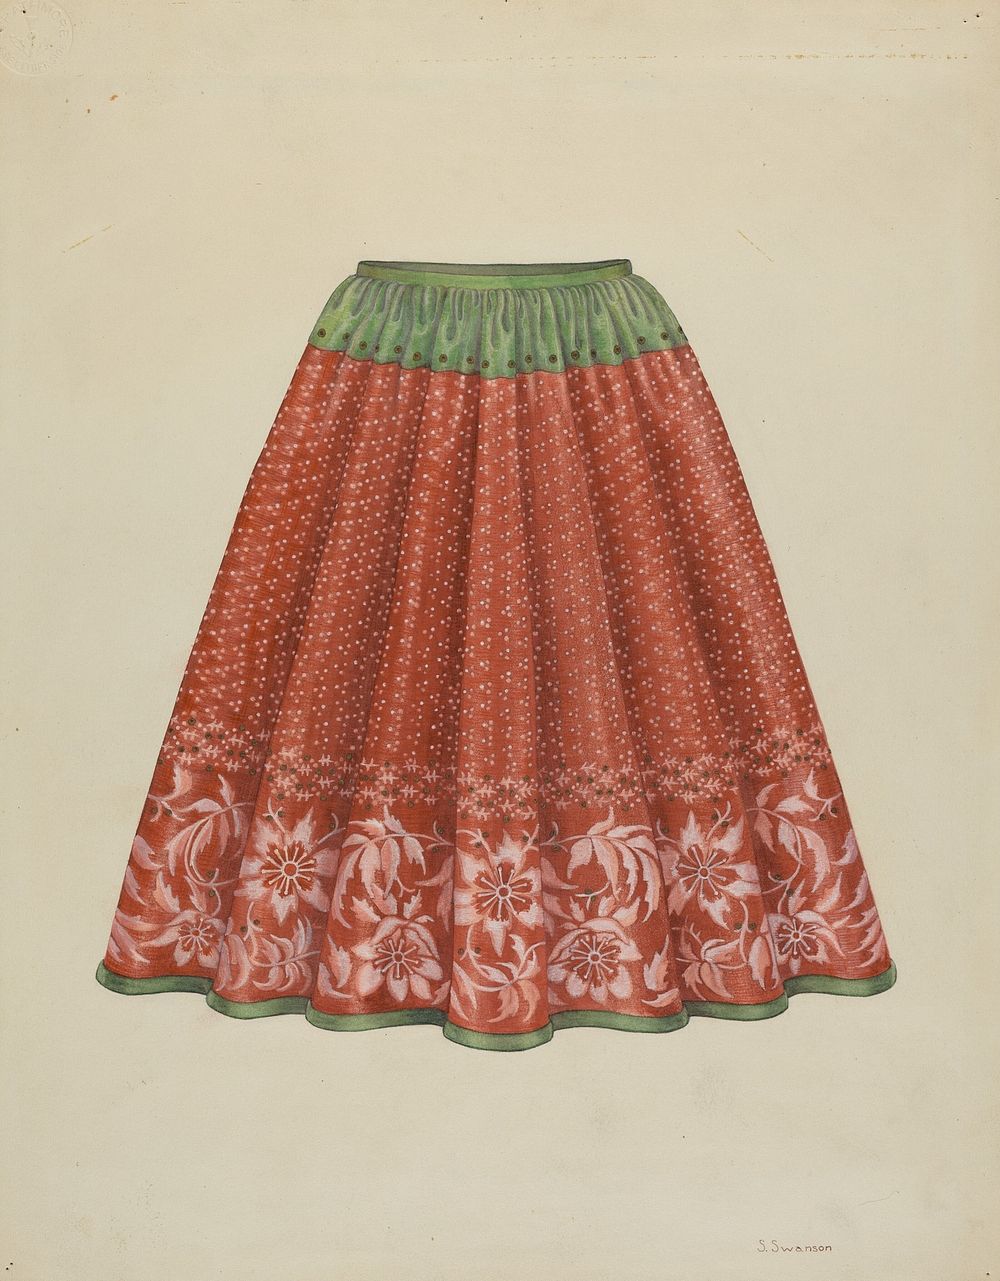 Child's Skirt (ca.1936) by Syrena Swanson.  